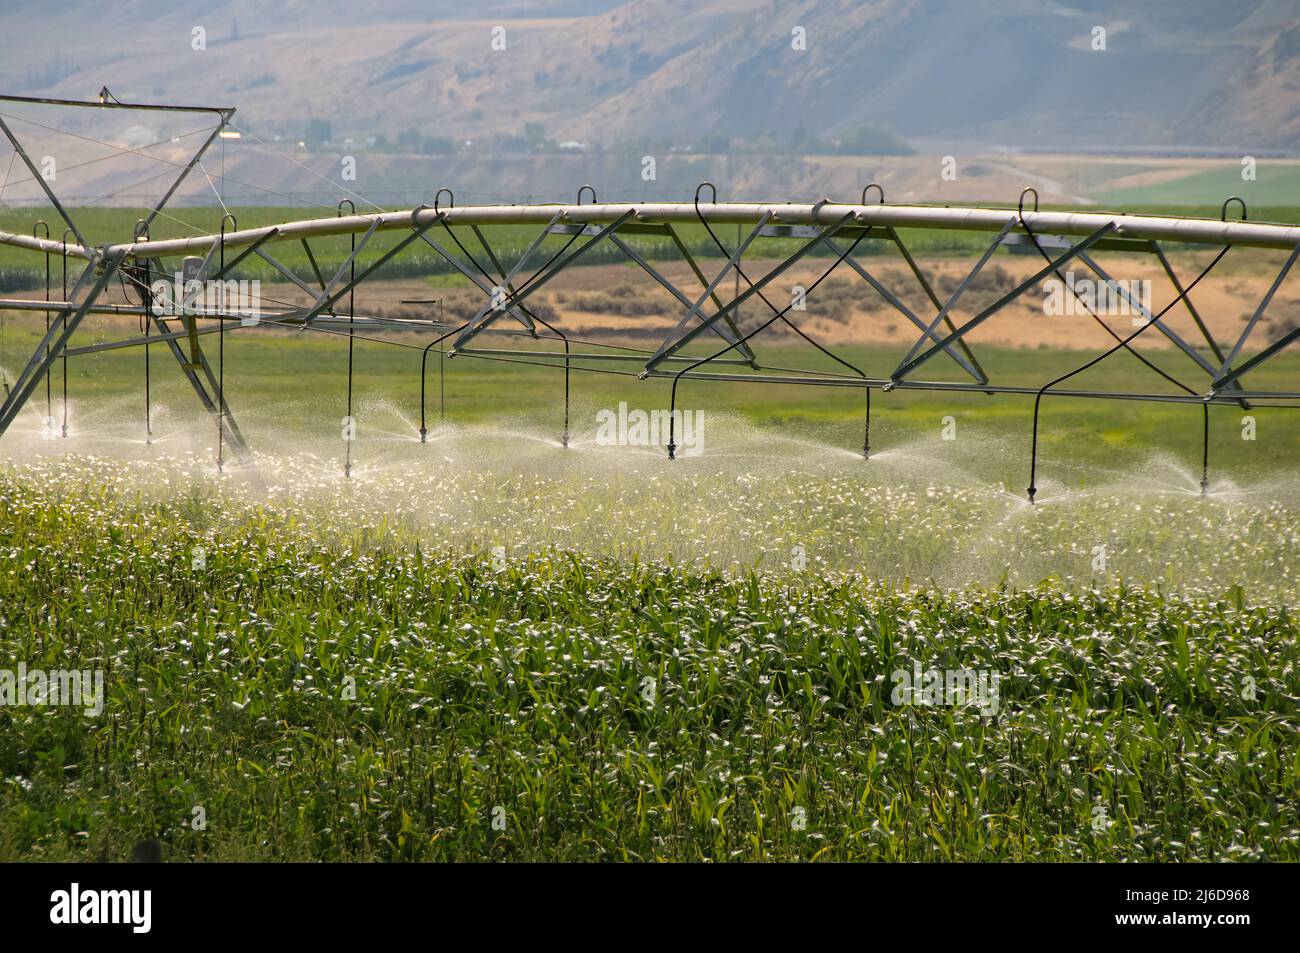 Automated Irrigation System for Agriculture Stock Photo